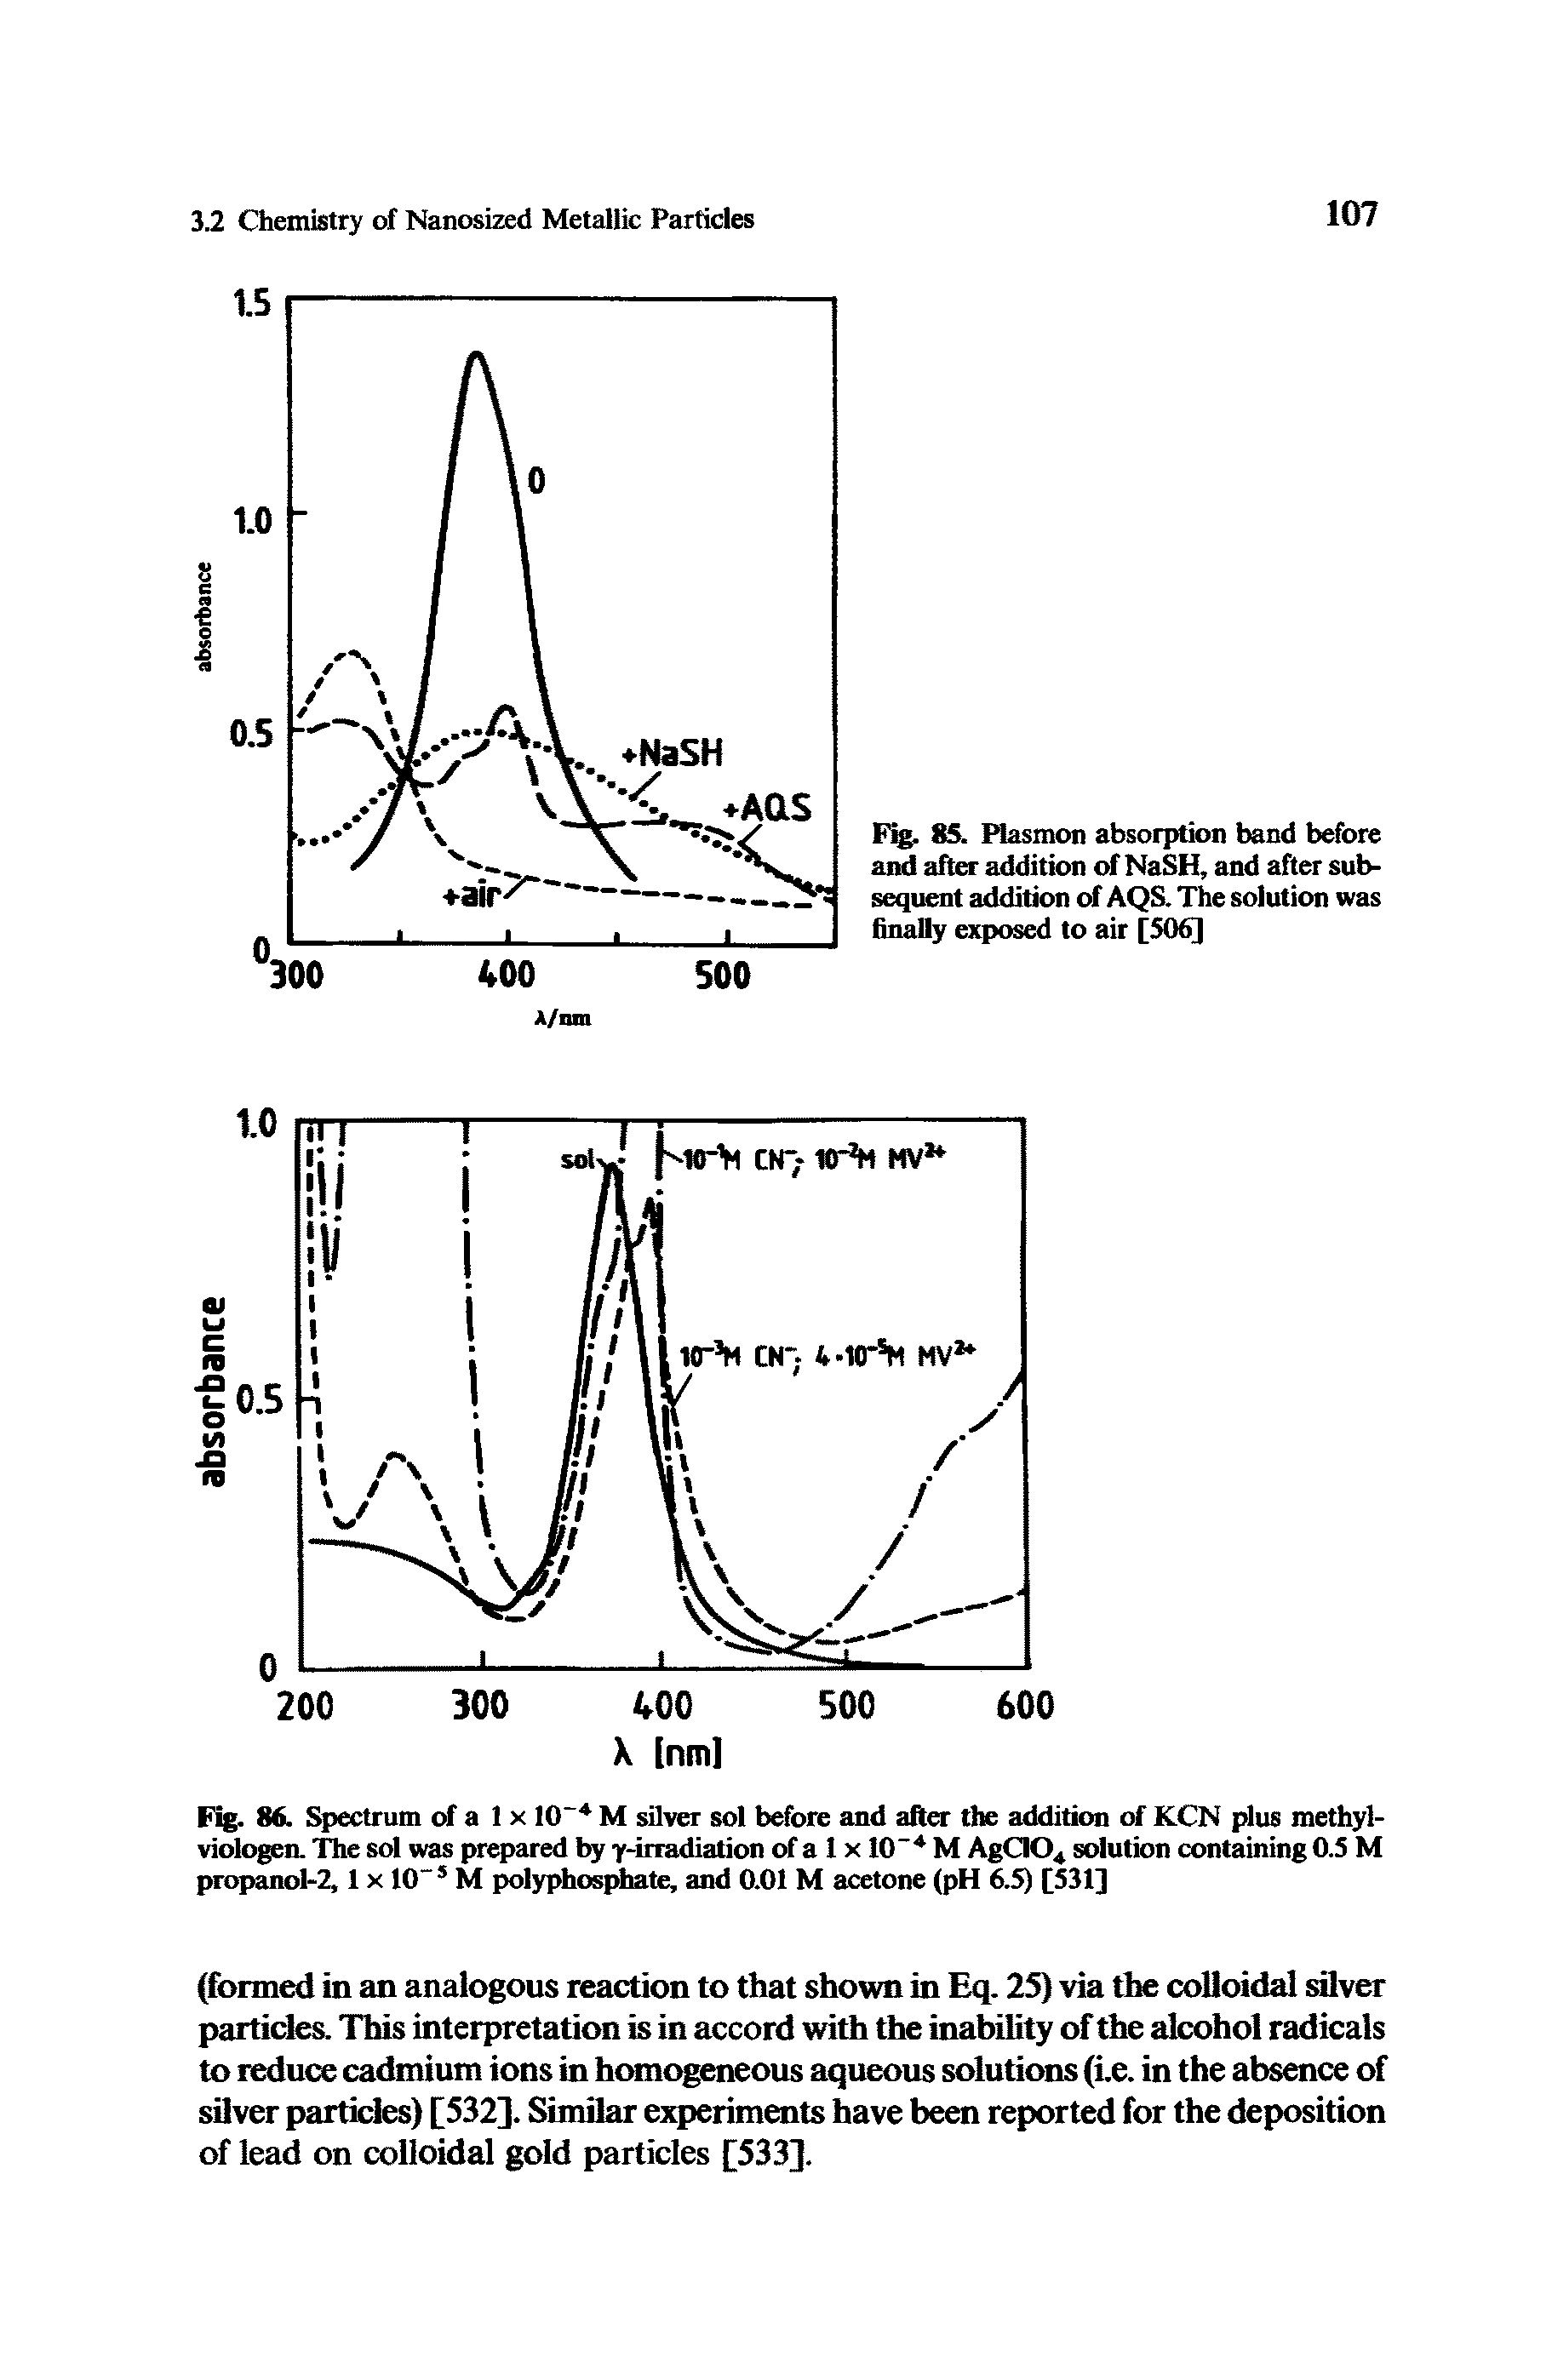 Fig. 86. Spectrum of a 1 x ltT4 M silver sol before and after the addition of KCN plus methyl-viologen. The sol was prepared by y-irradiation of a 1 x 10 4 M AgCIO solution containing 0.5 M propanol-2,1 x 10" 5 M polyphosphate, and 0.01 M acetone (pH 6.5) [531]...